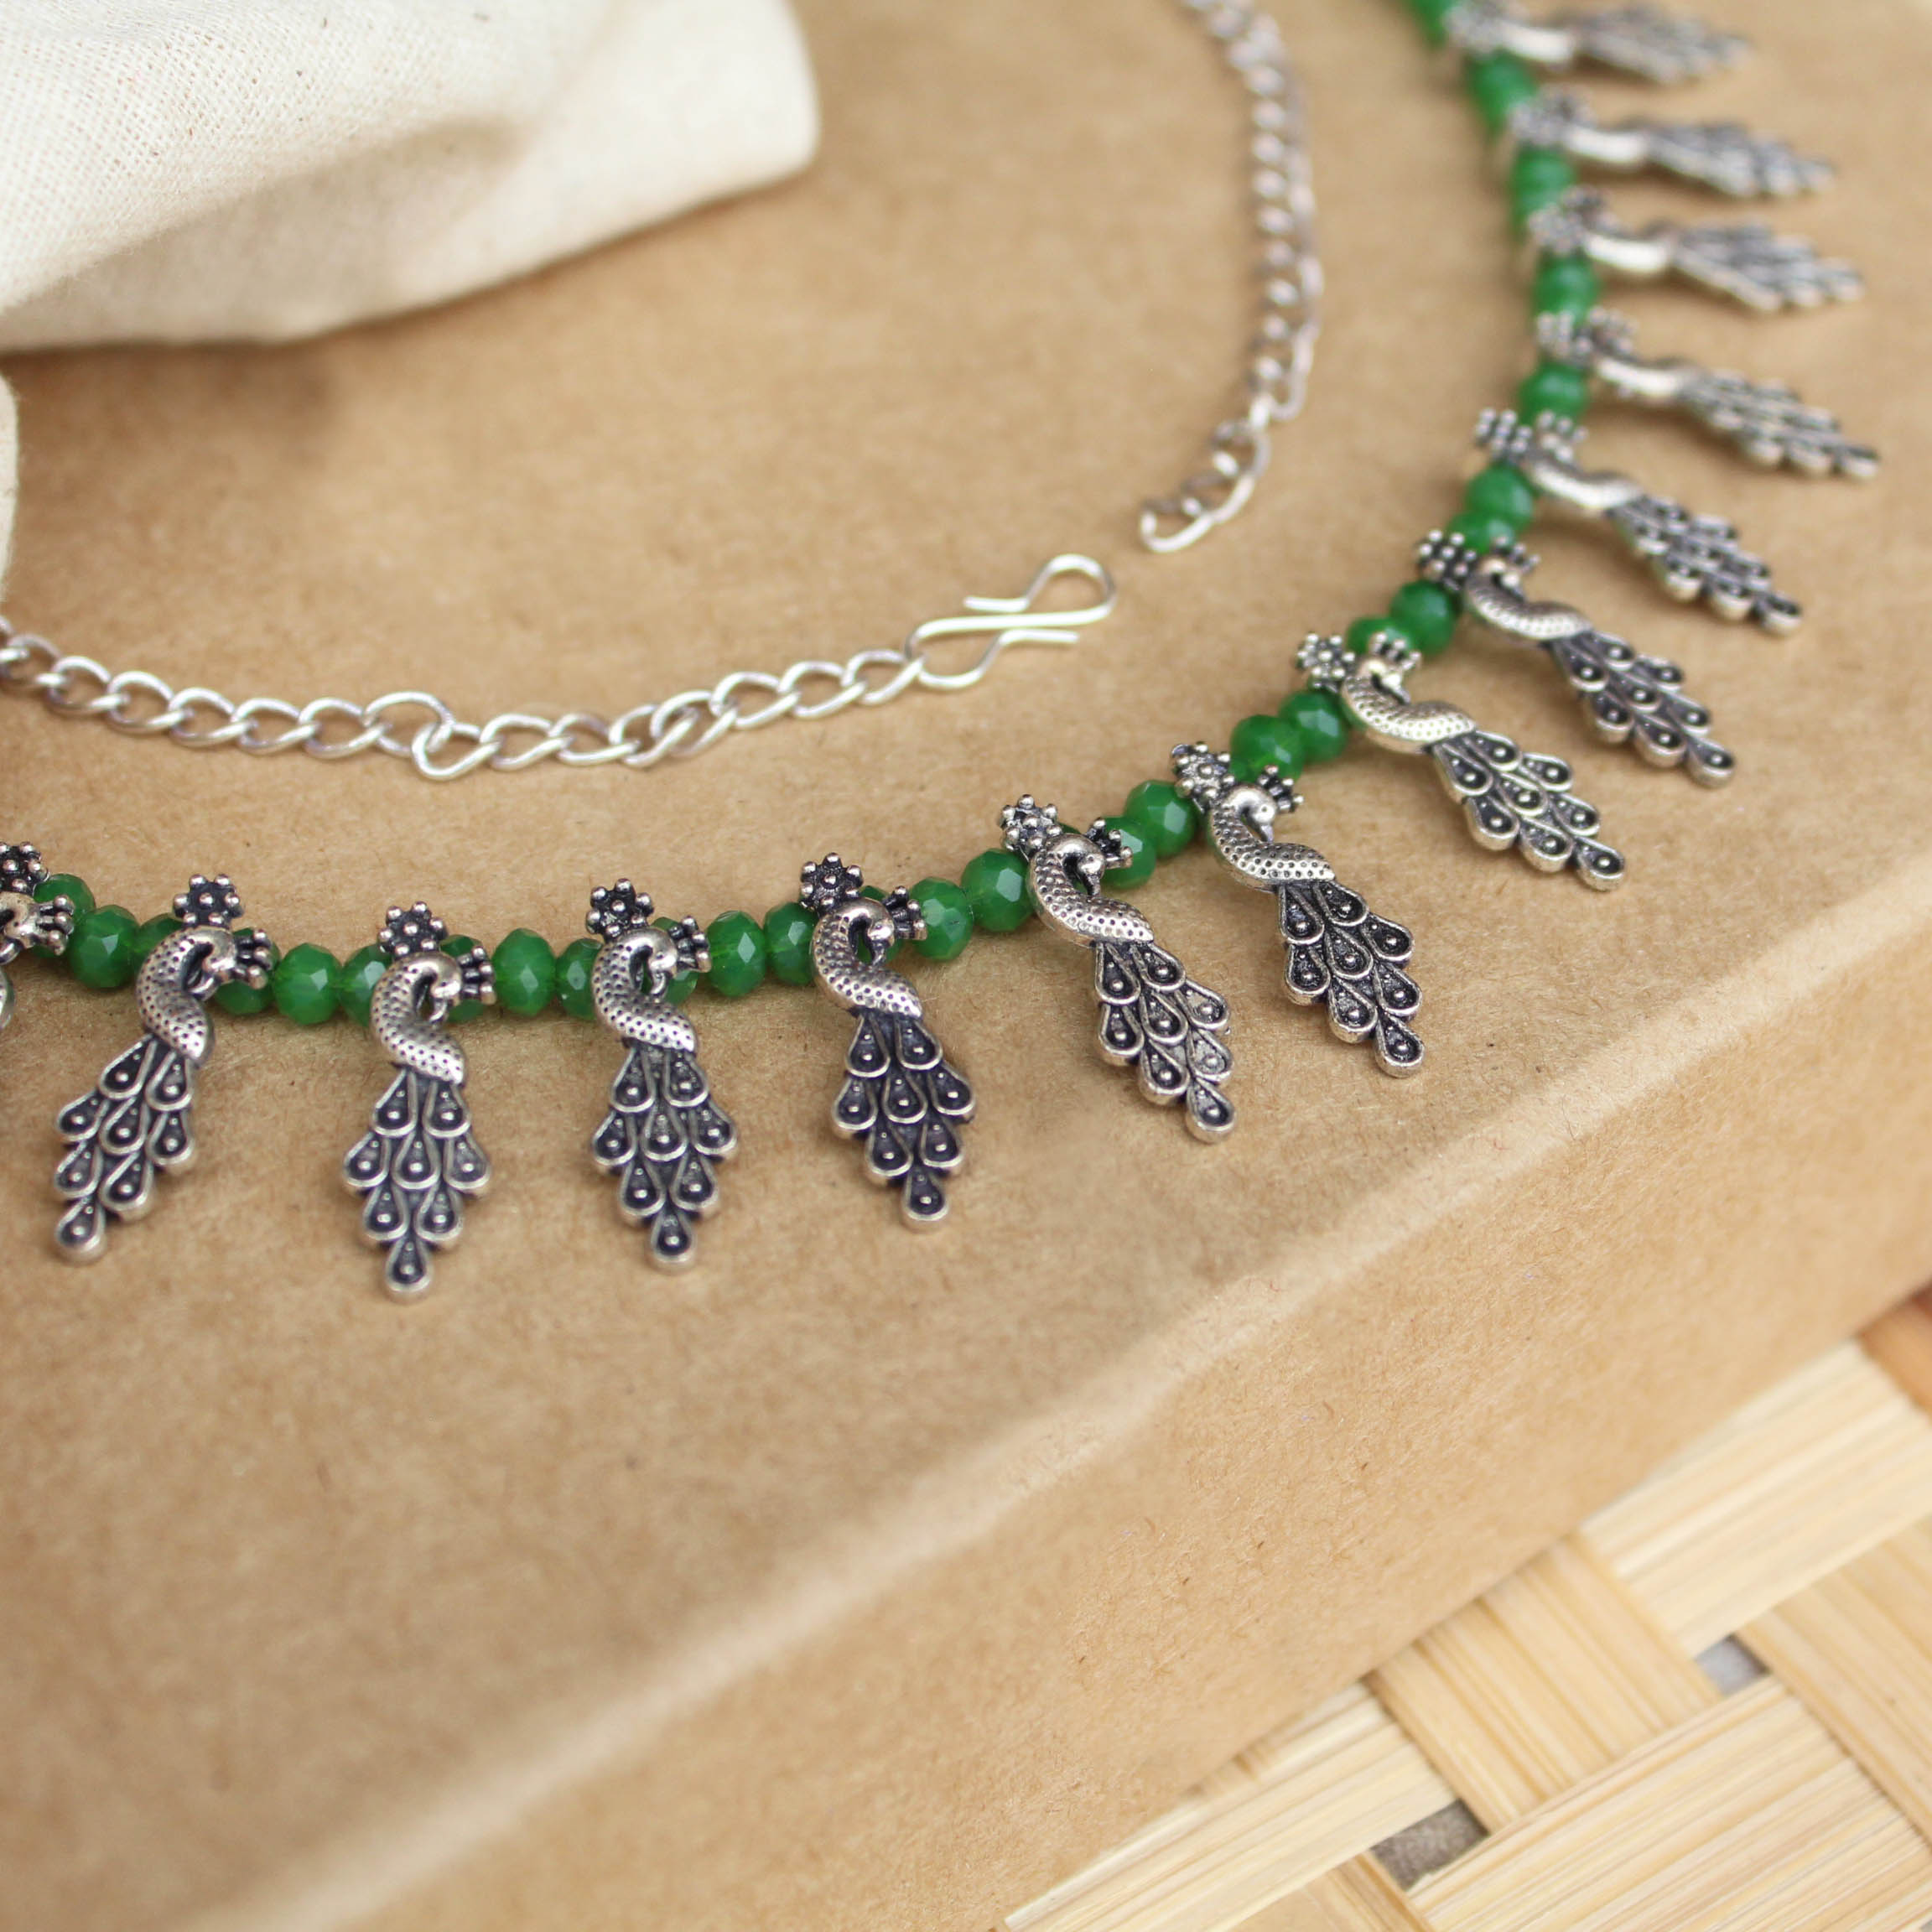 Intricate Beaded Peacock Motif Necklace